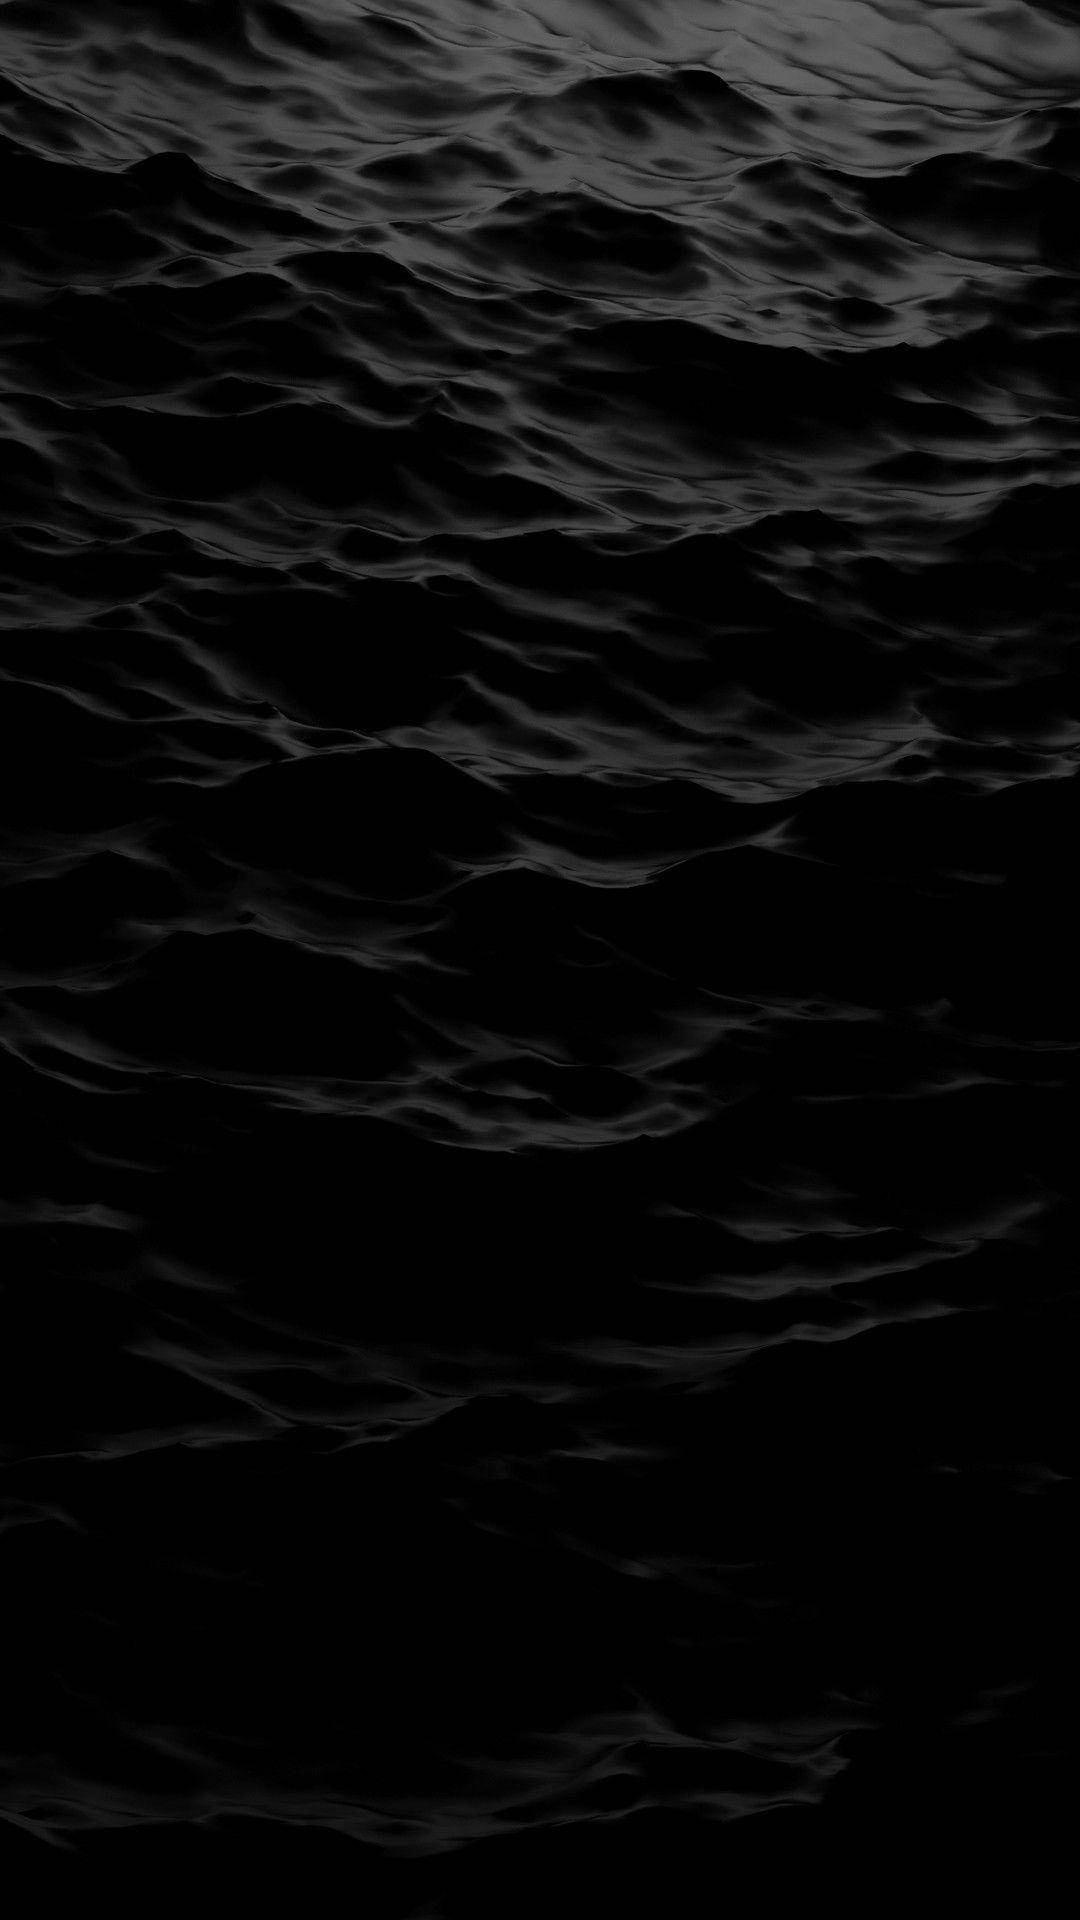 Aesthetic Pure Black Waves Of Water Background